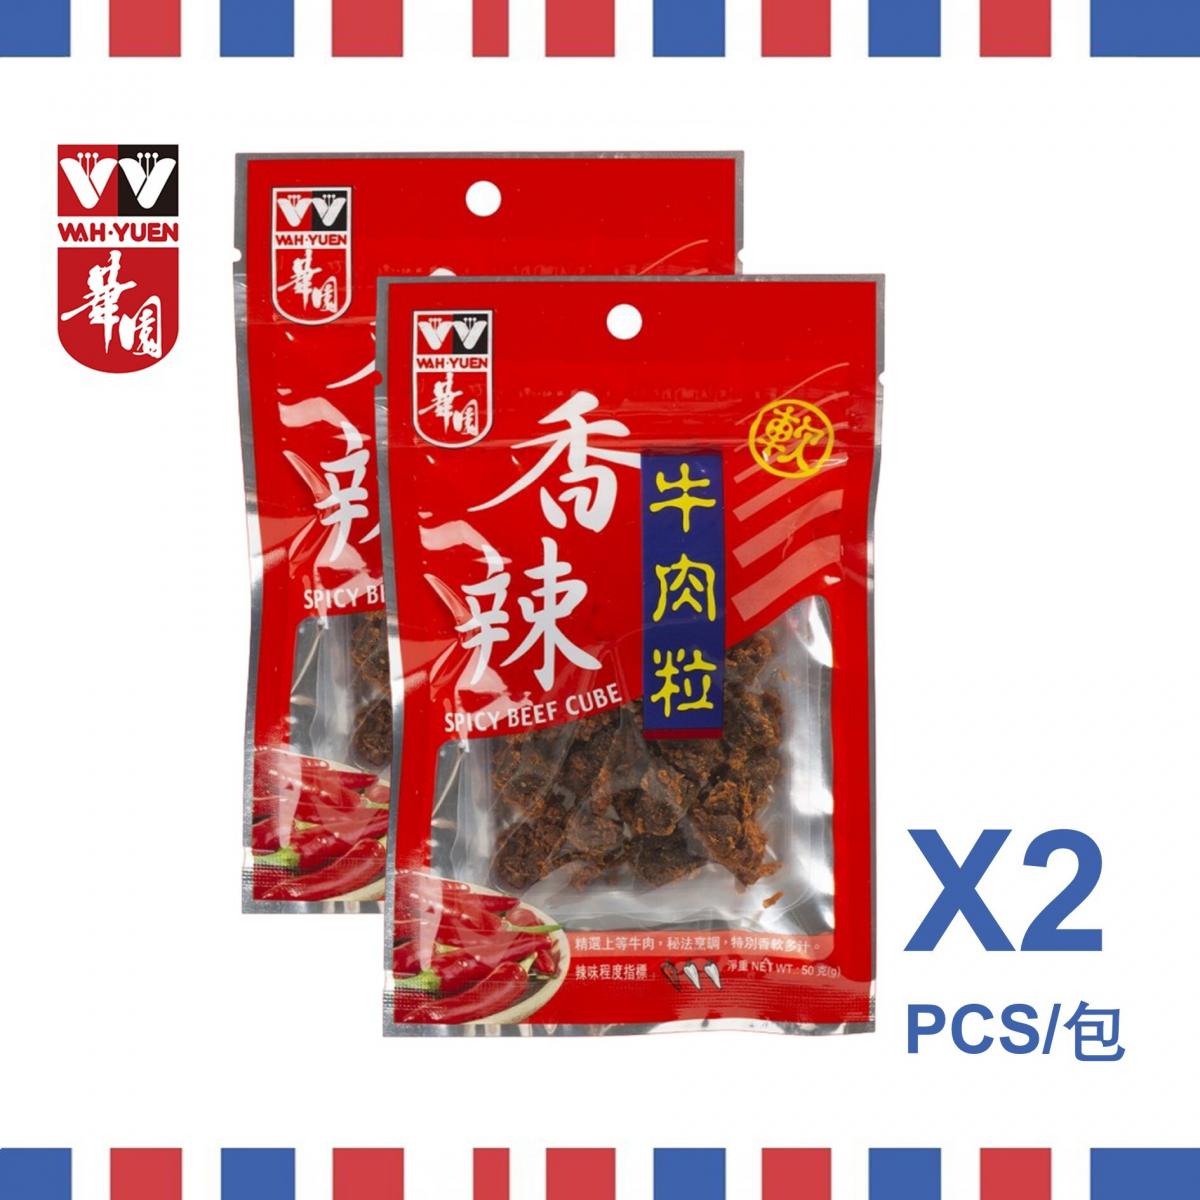 SPICY BEEF CUBE 50g (2pcs)